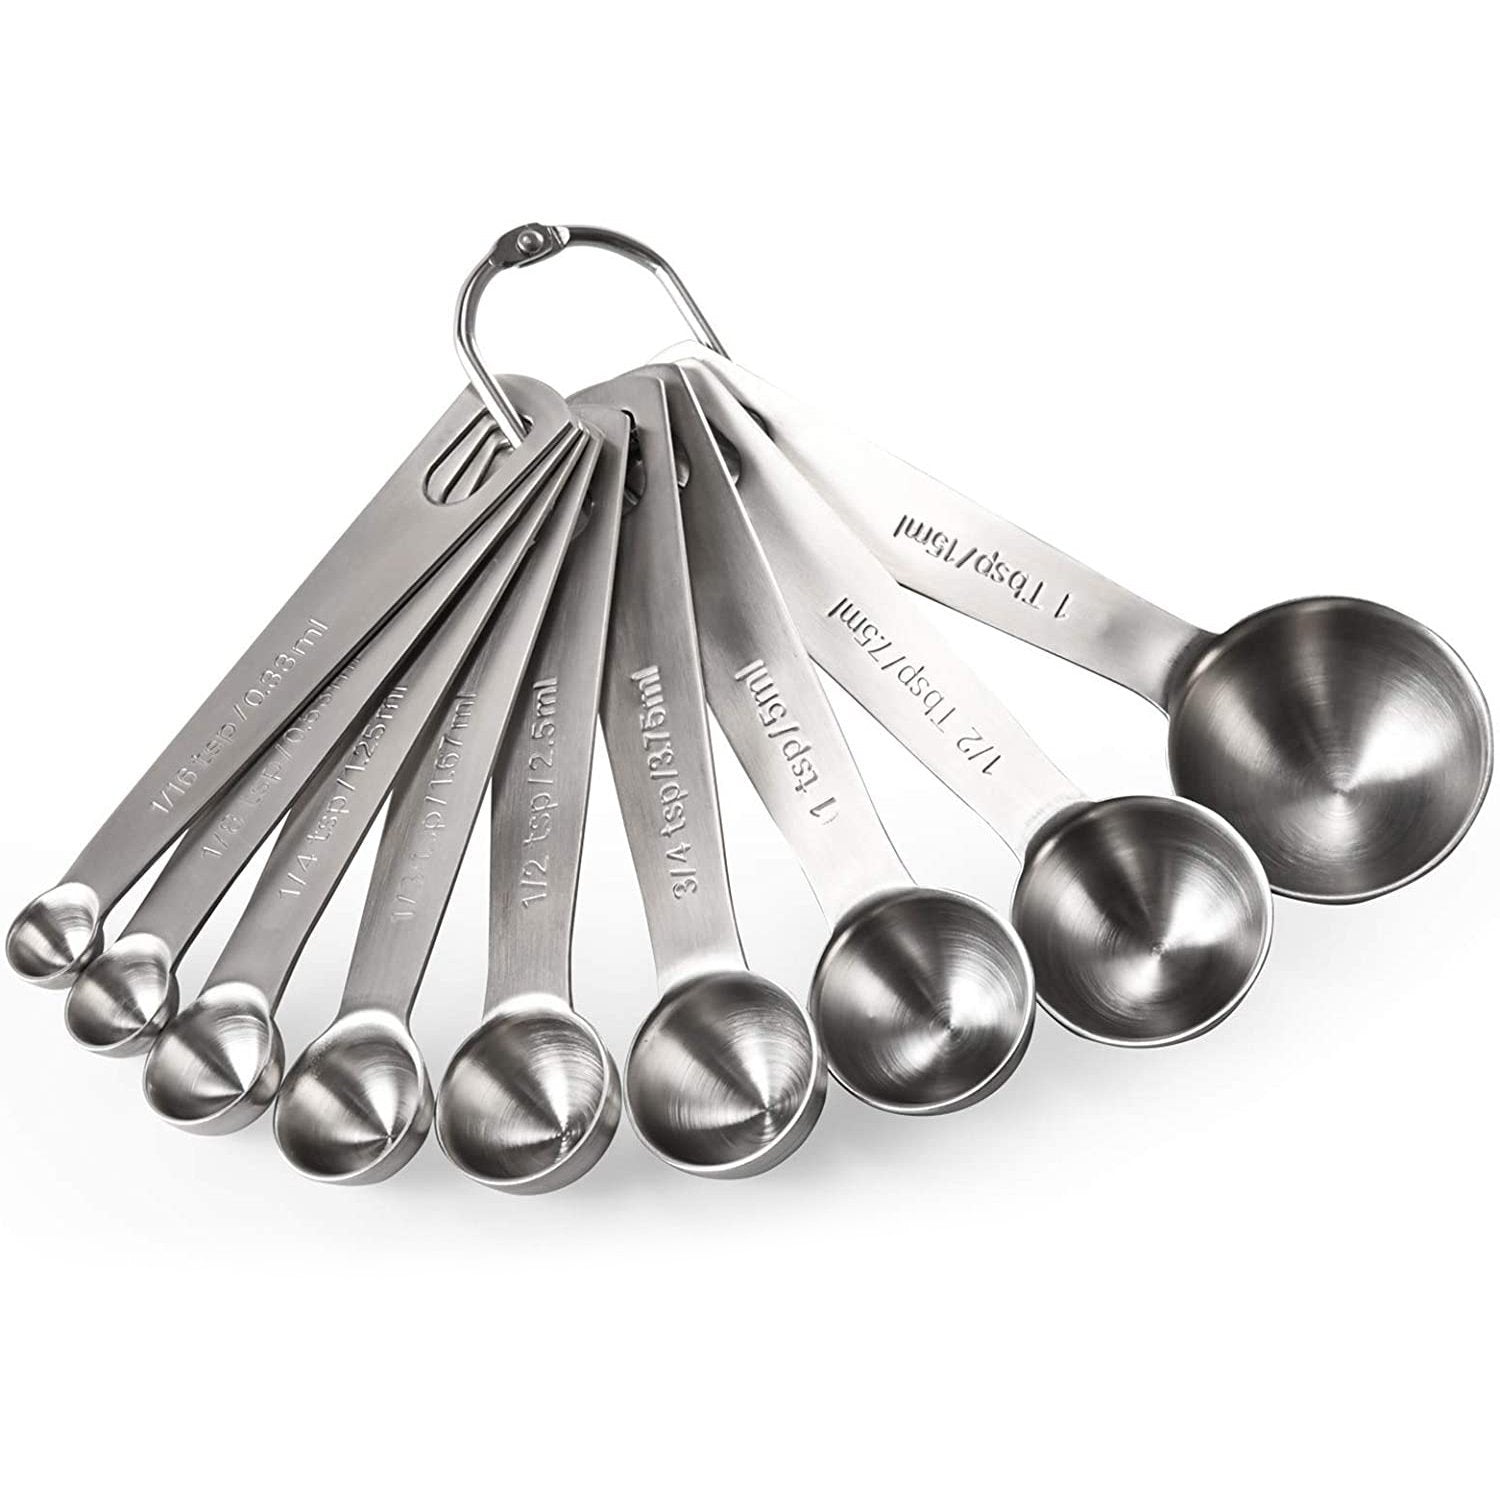 9pcs/set High Quality Magnetic Measuring Spoons Set Dual Sided